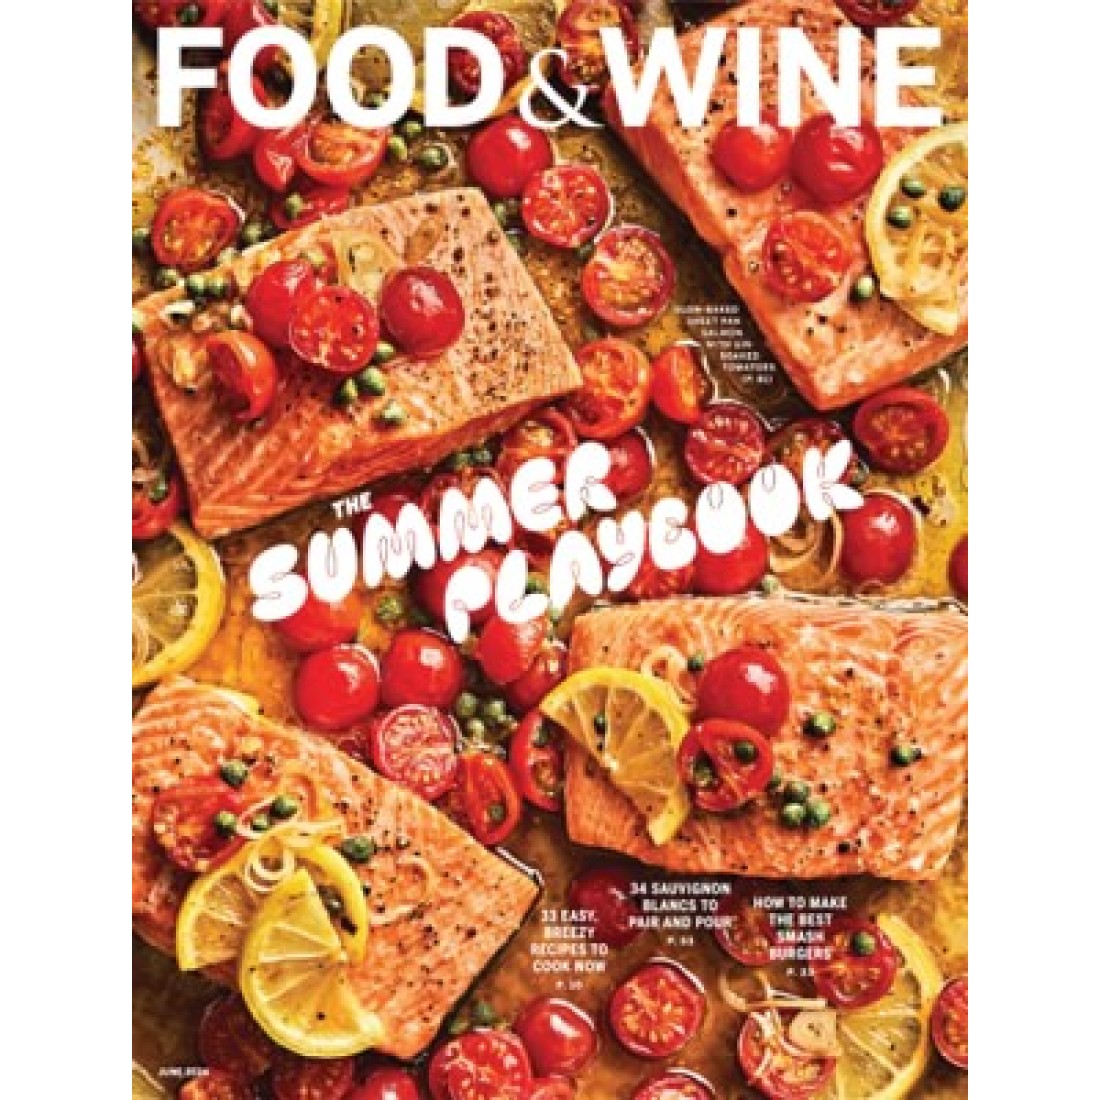 Subscribe or Renew Food & Wine Magazine Subscription. Save 22